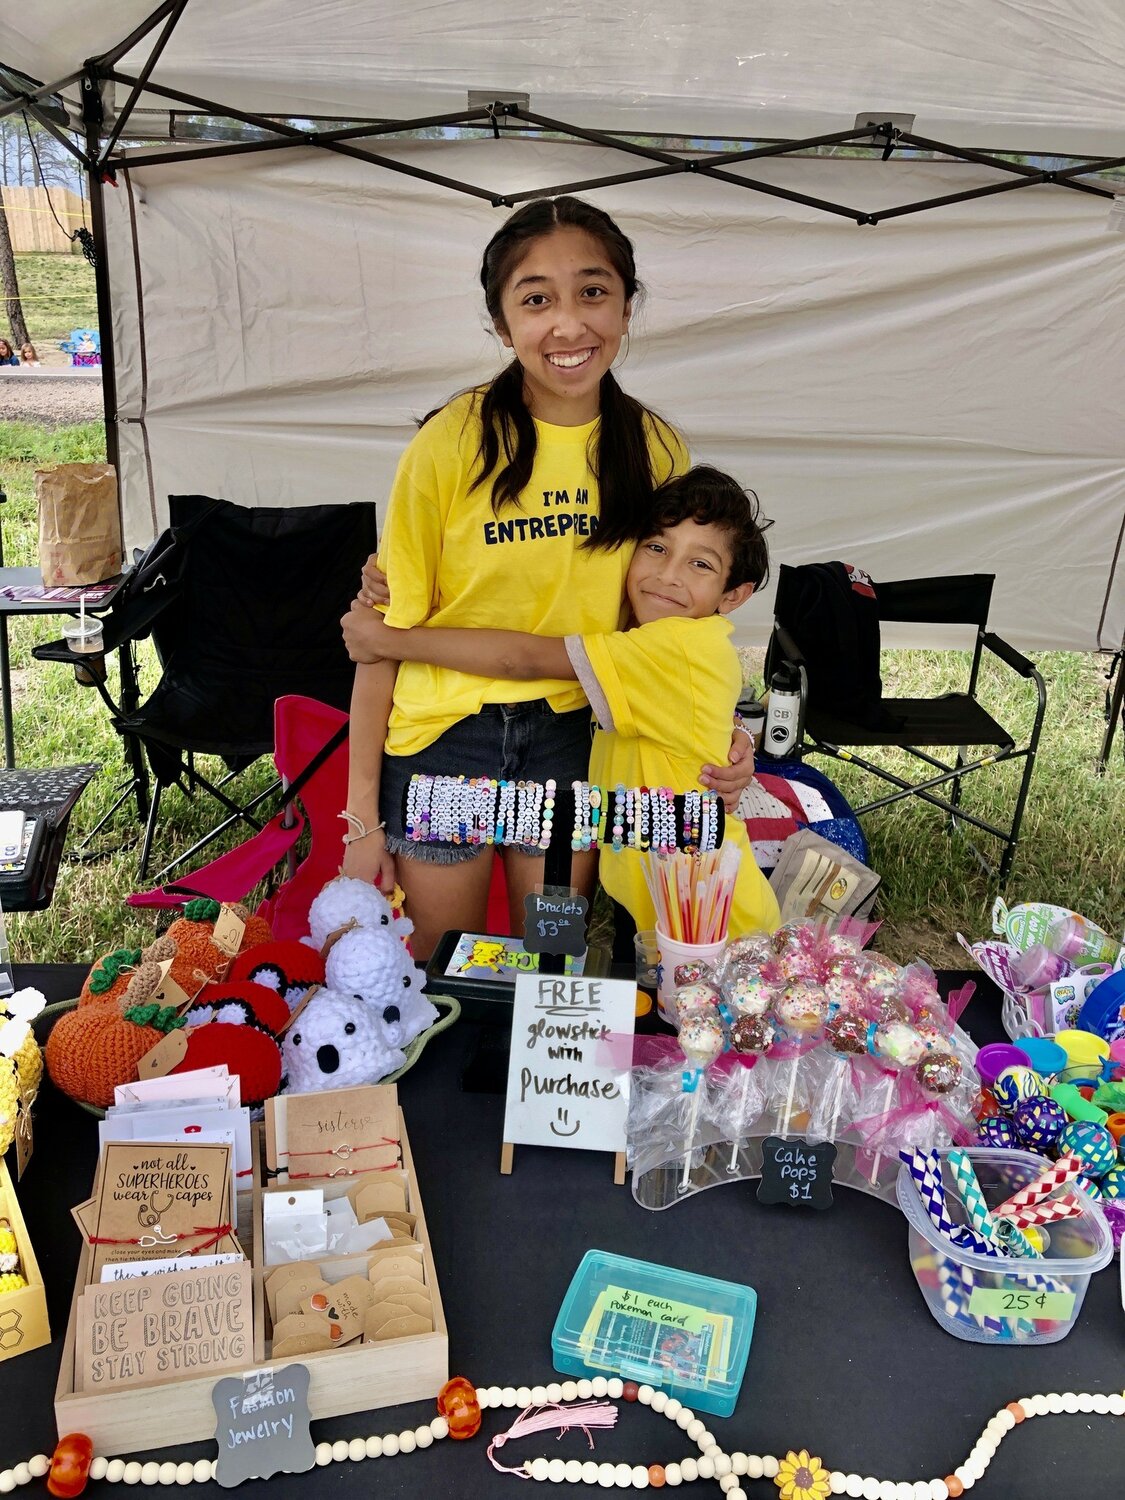 “The kids must do all the selling. Their parents are welcome to help set-up, but strongly encouraged to stand back and let the children deliver the pitch and close the sale,” said Betsy Hess, organizer of the market.